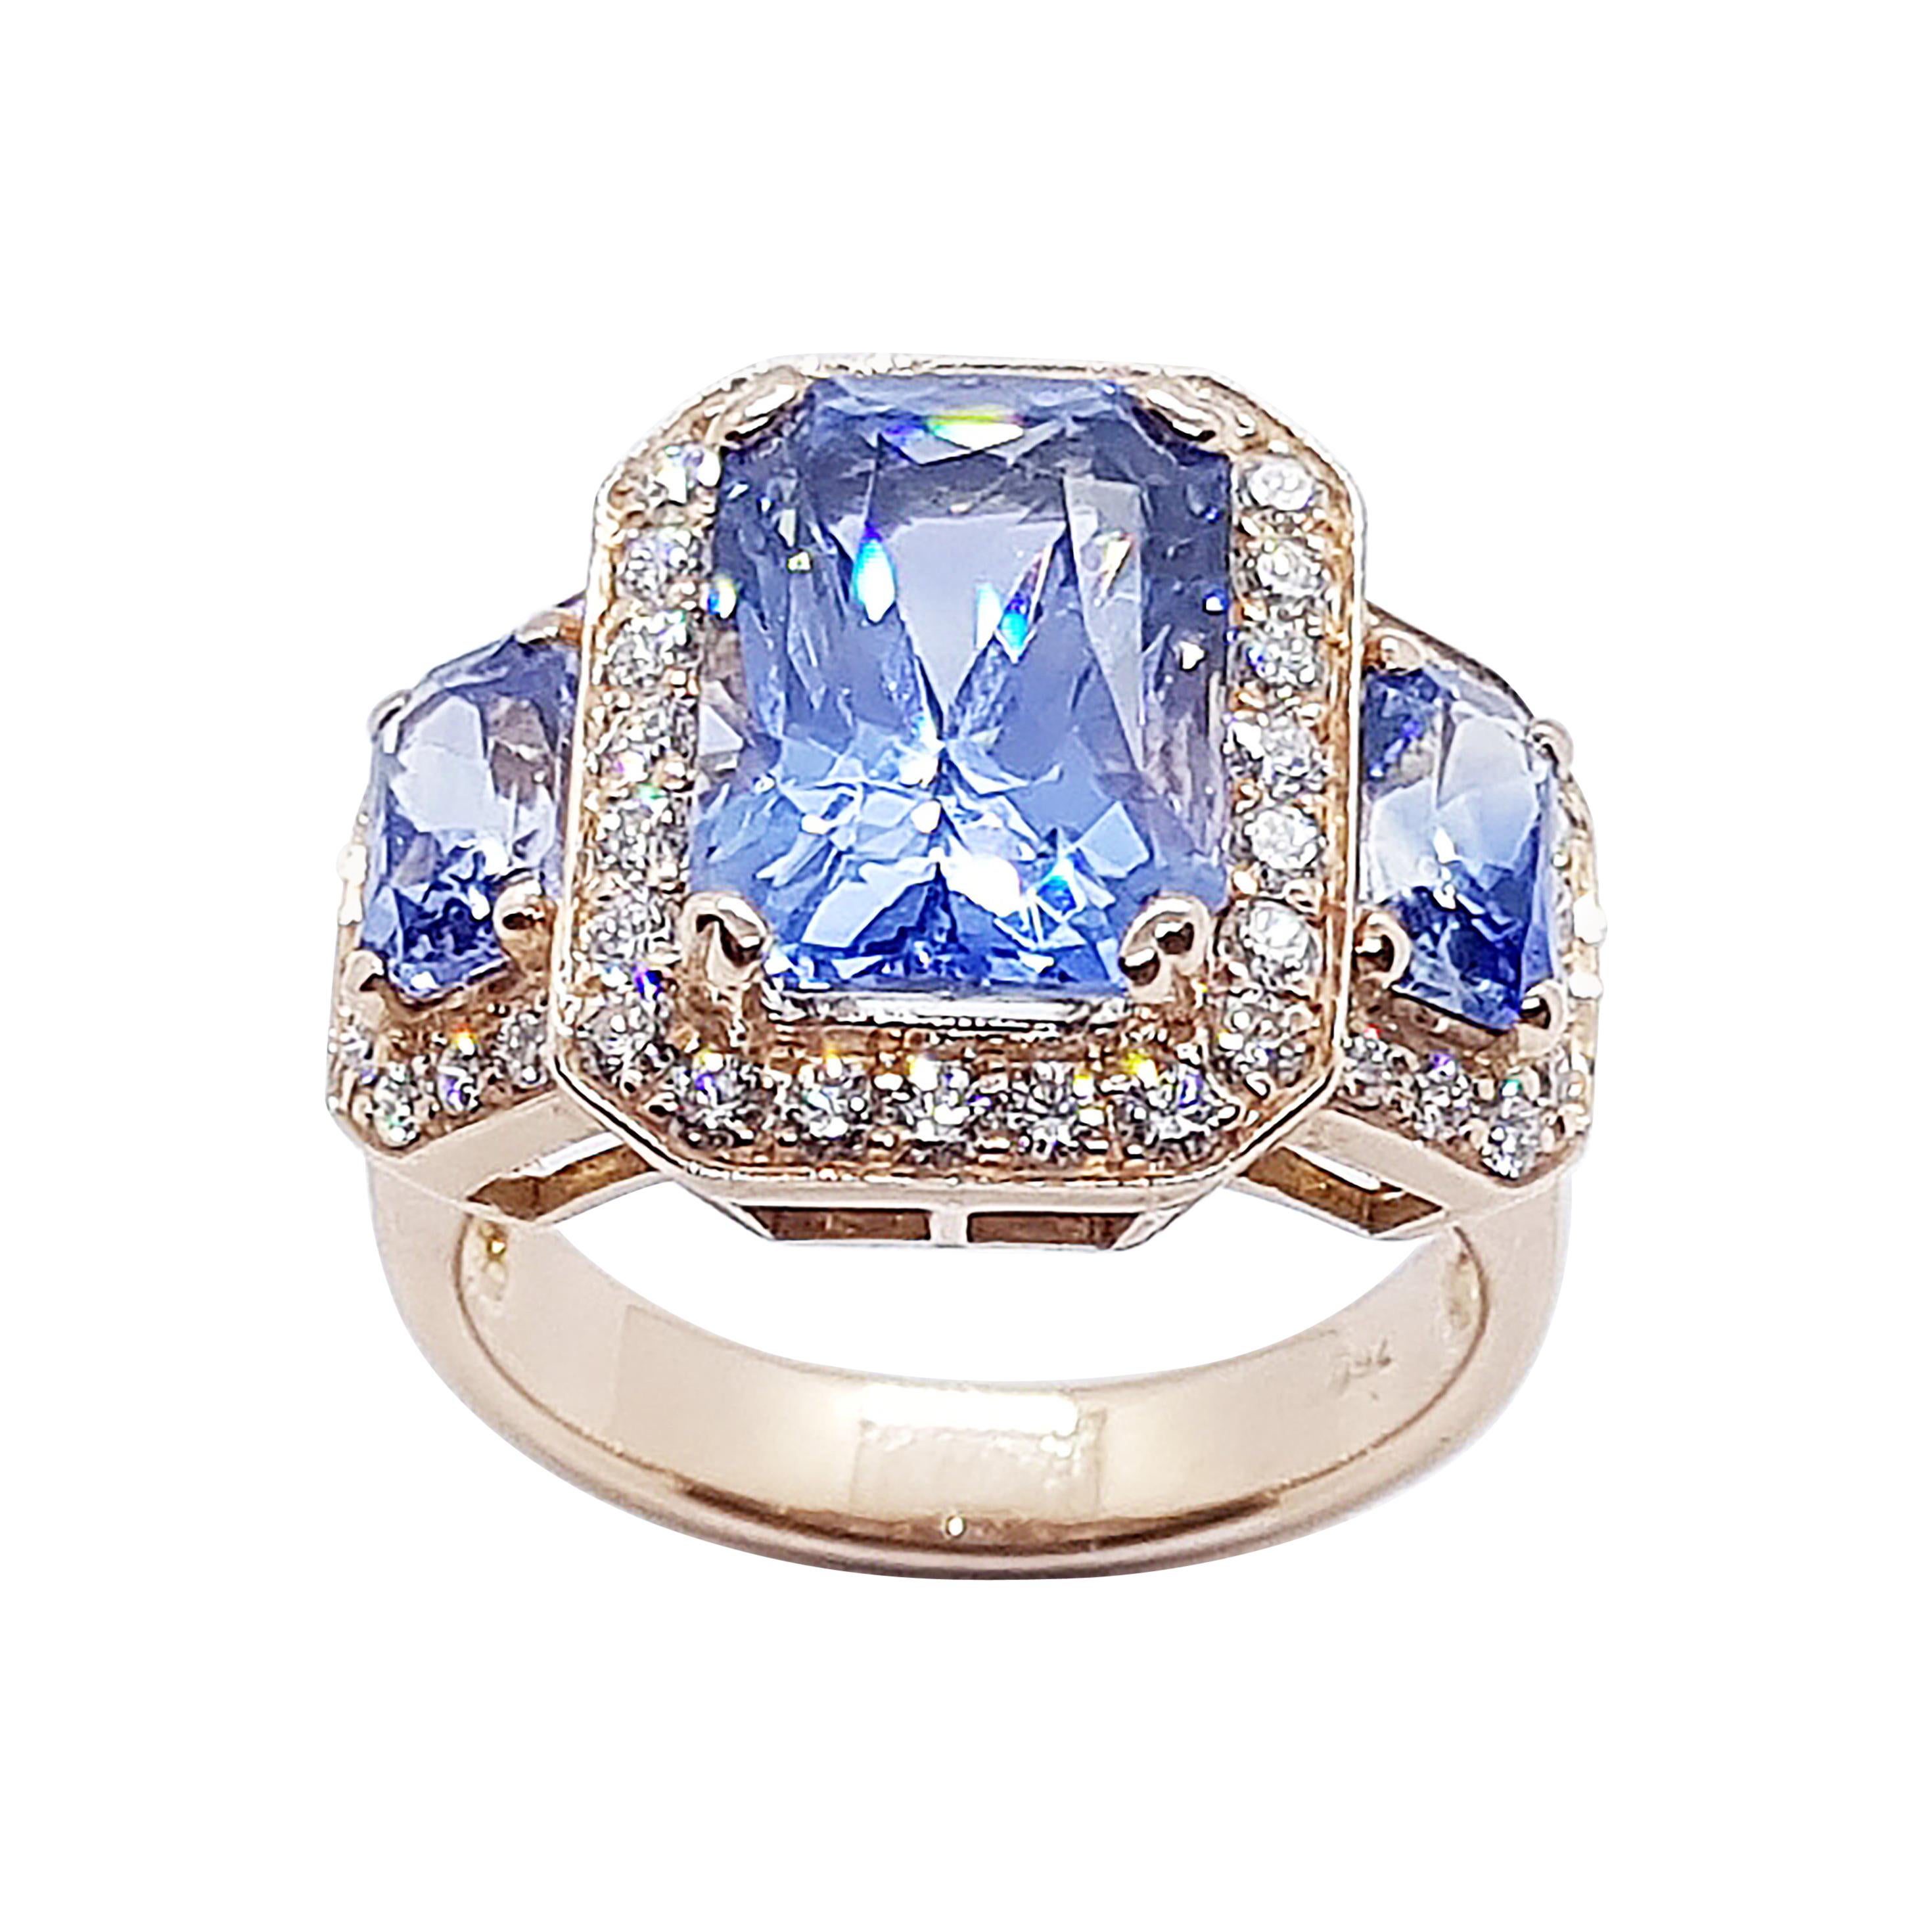 GIA Certified 5 Cts Ceylon Blue Sapphire with Diamond Ring in 18 Karat Rose Gold